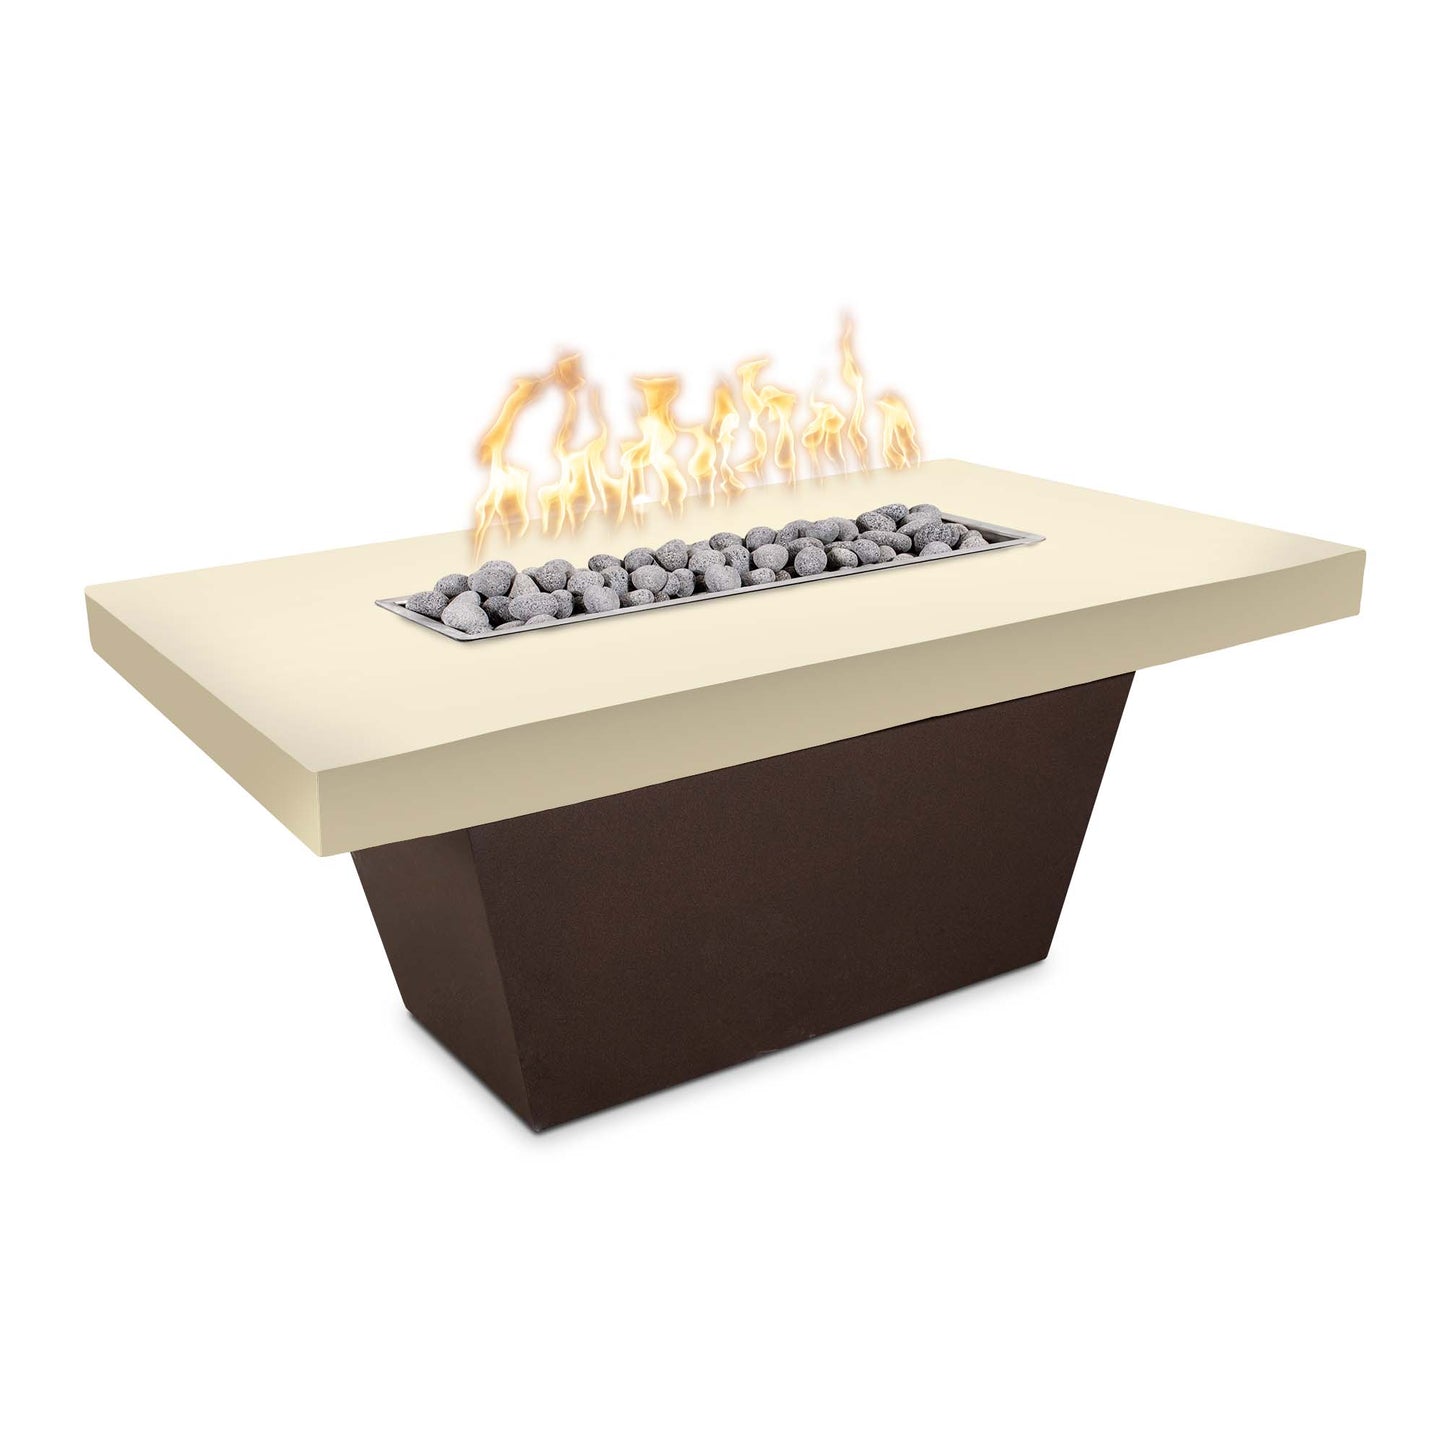 The Outdoor Plus Tacoma 48" Natural Gray Concrete Top & Silver Vein Powder Coated Base Liquid Propane Fire Table with Match Lit Ignition